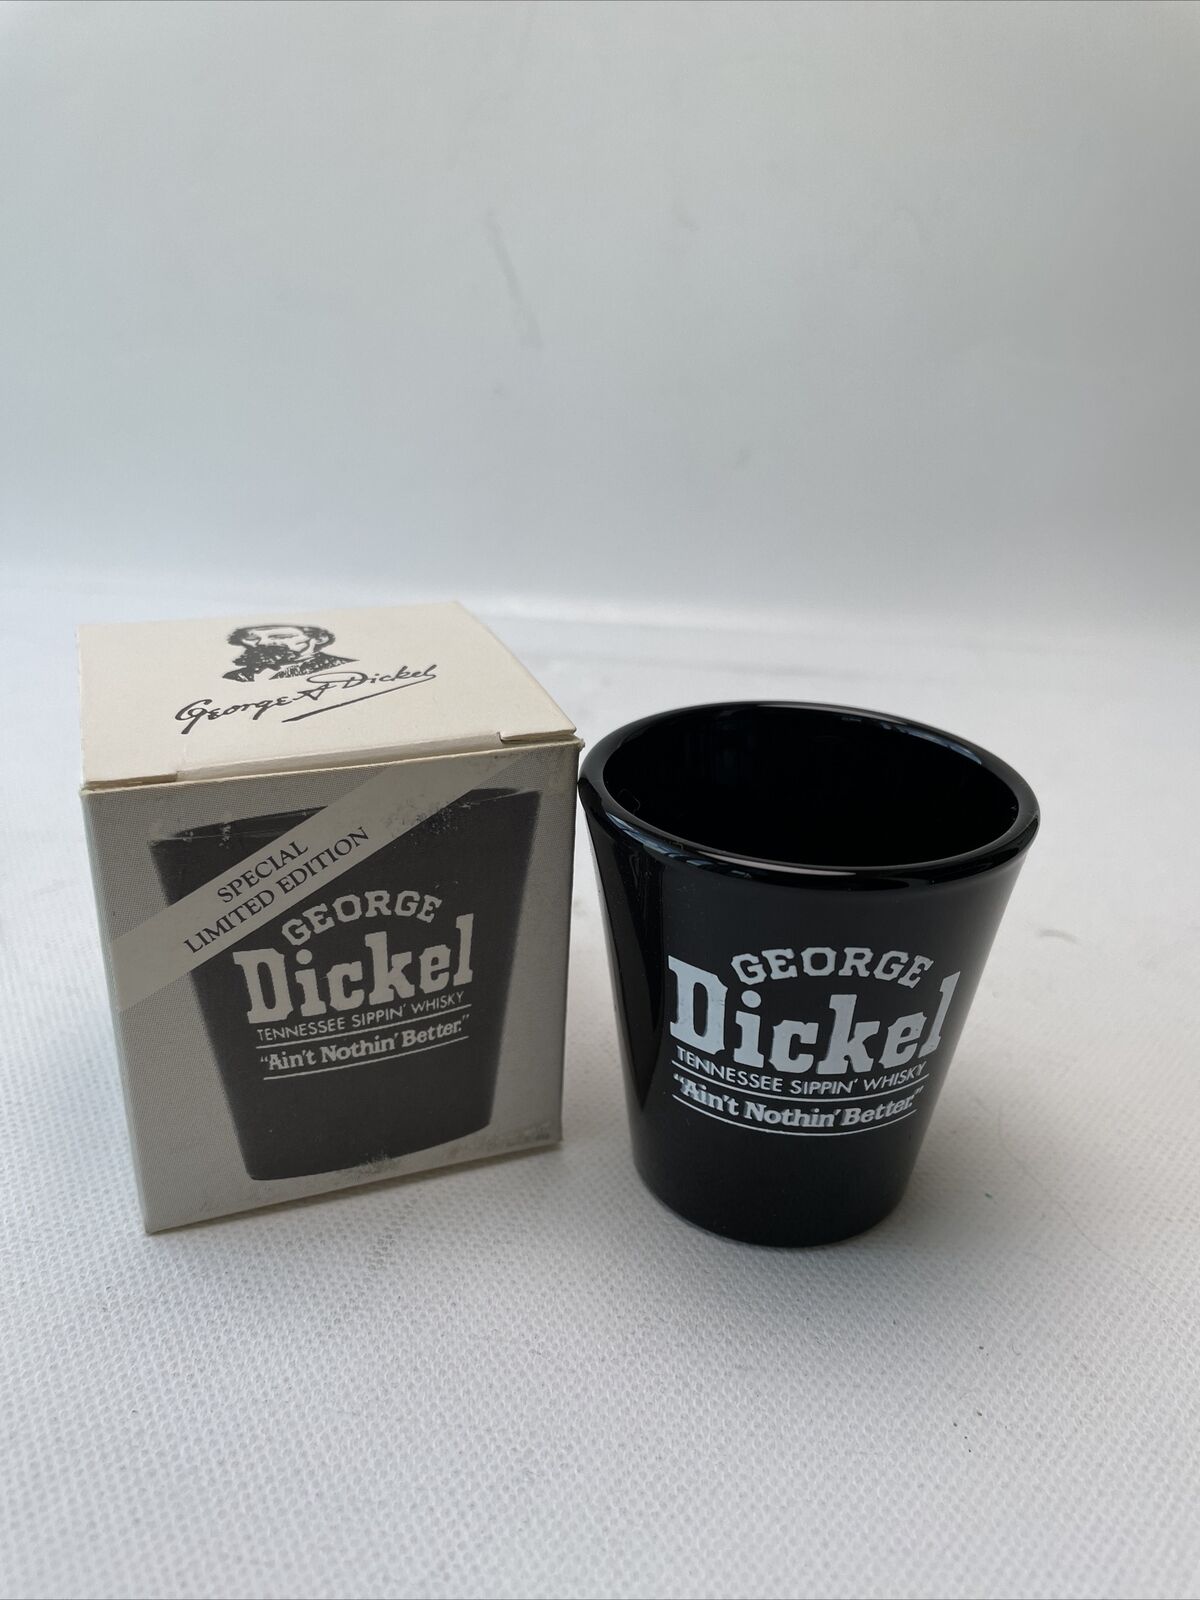 George Dickel Tennessee Sippin’ BLACK WHISKY SHOT GLASS. New in Box Vintage